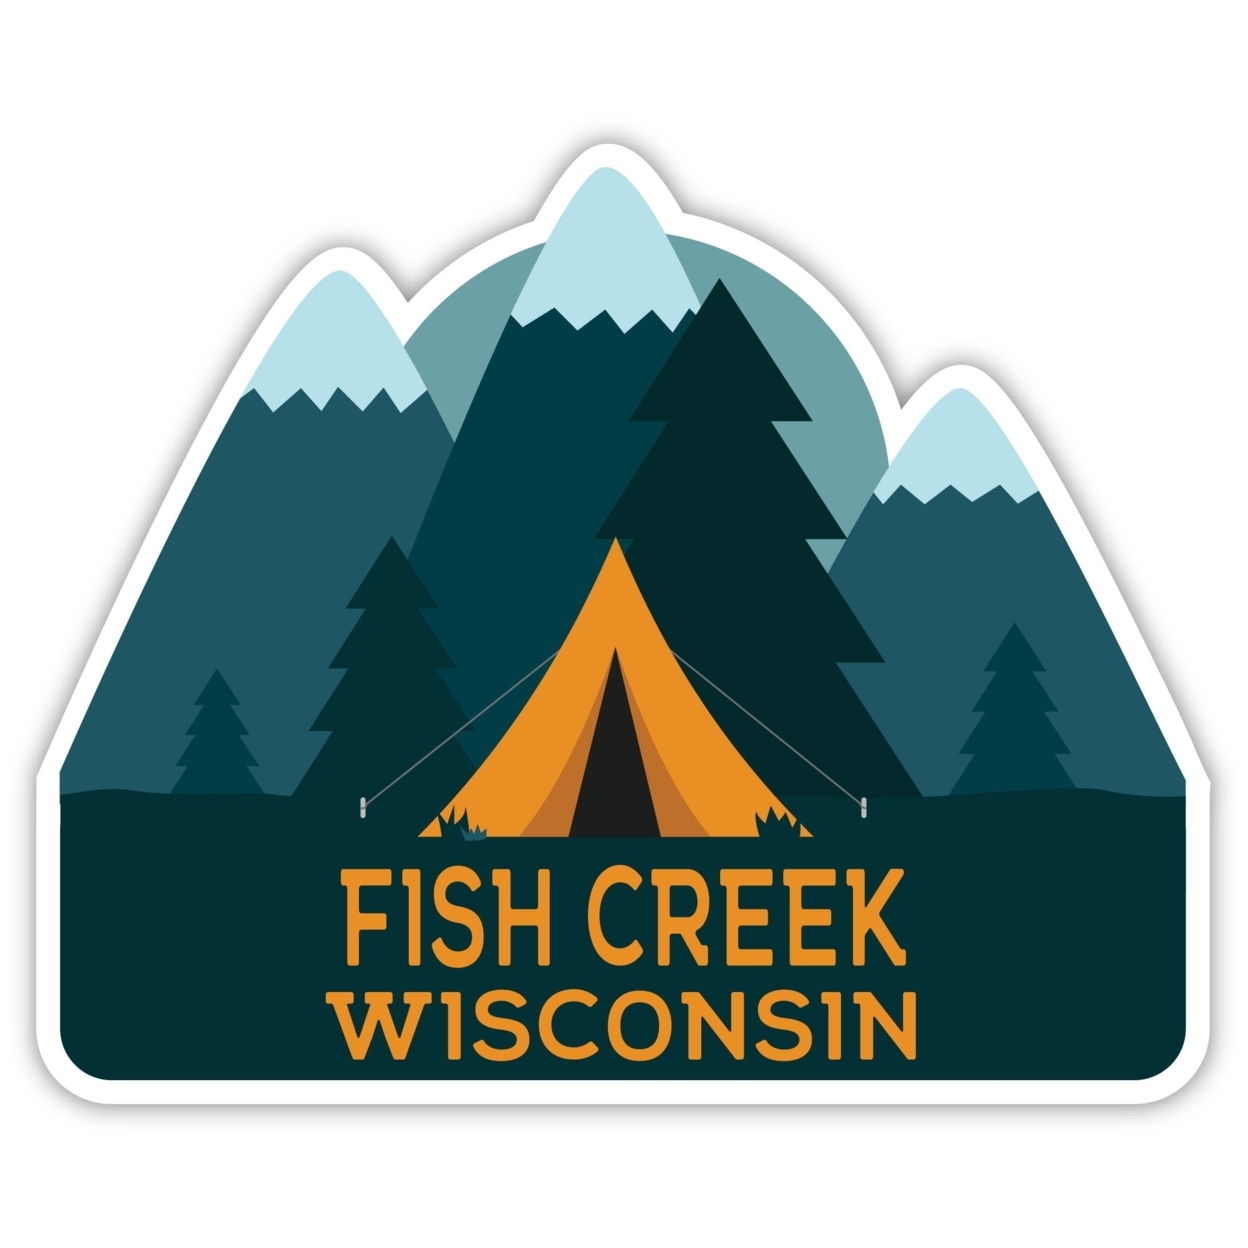 Fish Creek Wisconsin Souvenir Decorative Stickers (Choose Theme And Size) - 4-Pack, 6-Inch, Tent